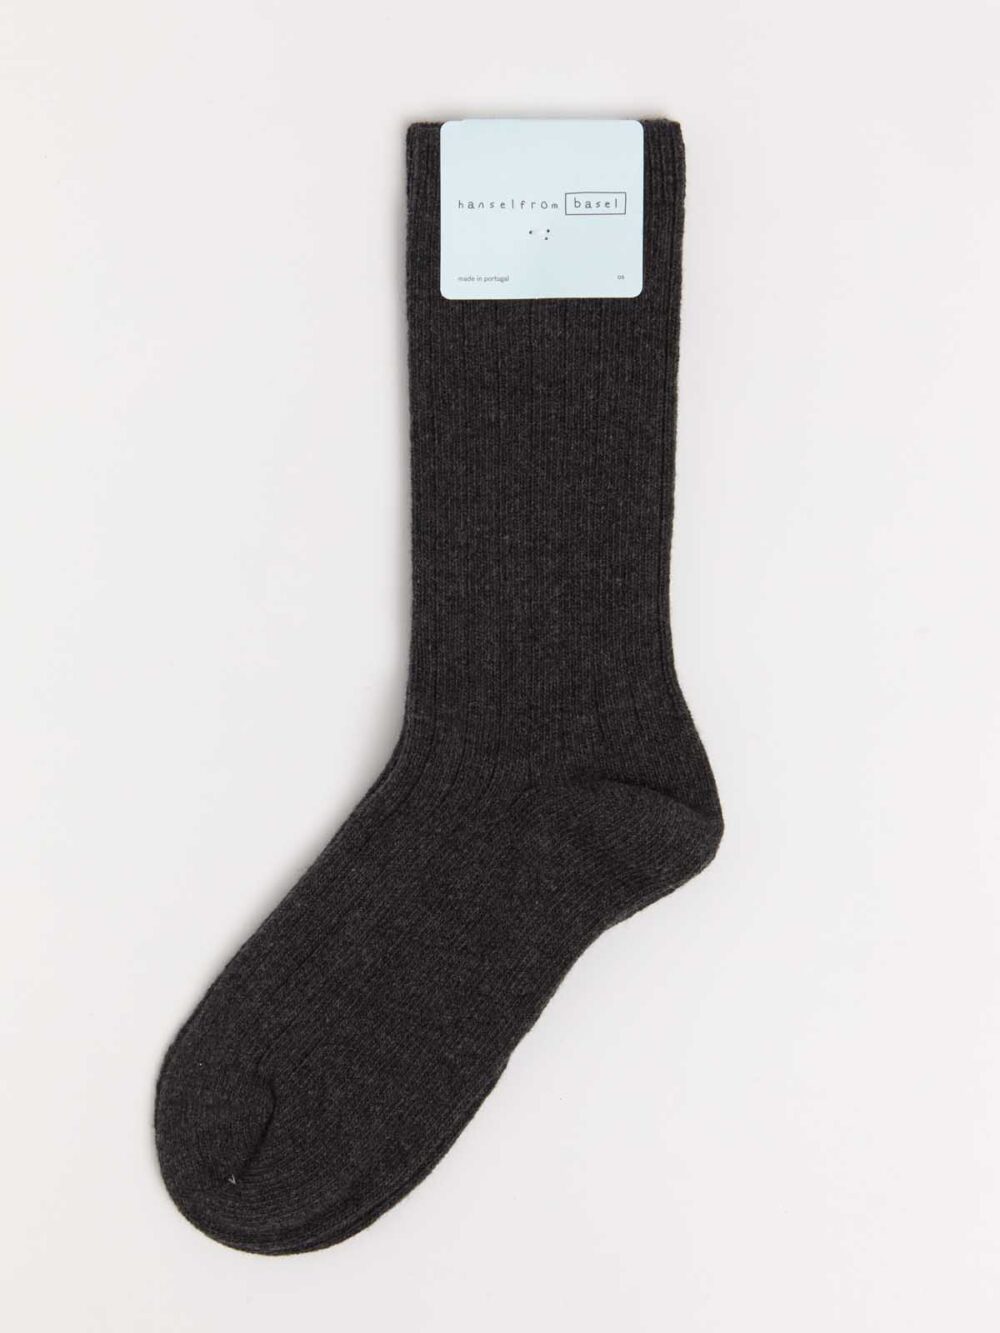 Italia Cashmere Rib Crew in Charcoal by Hansel from Basel